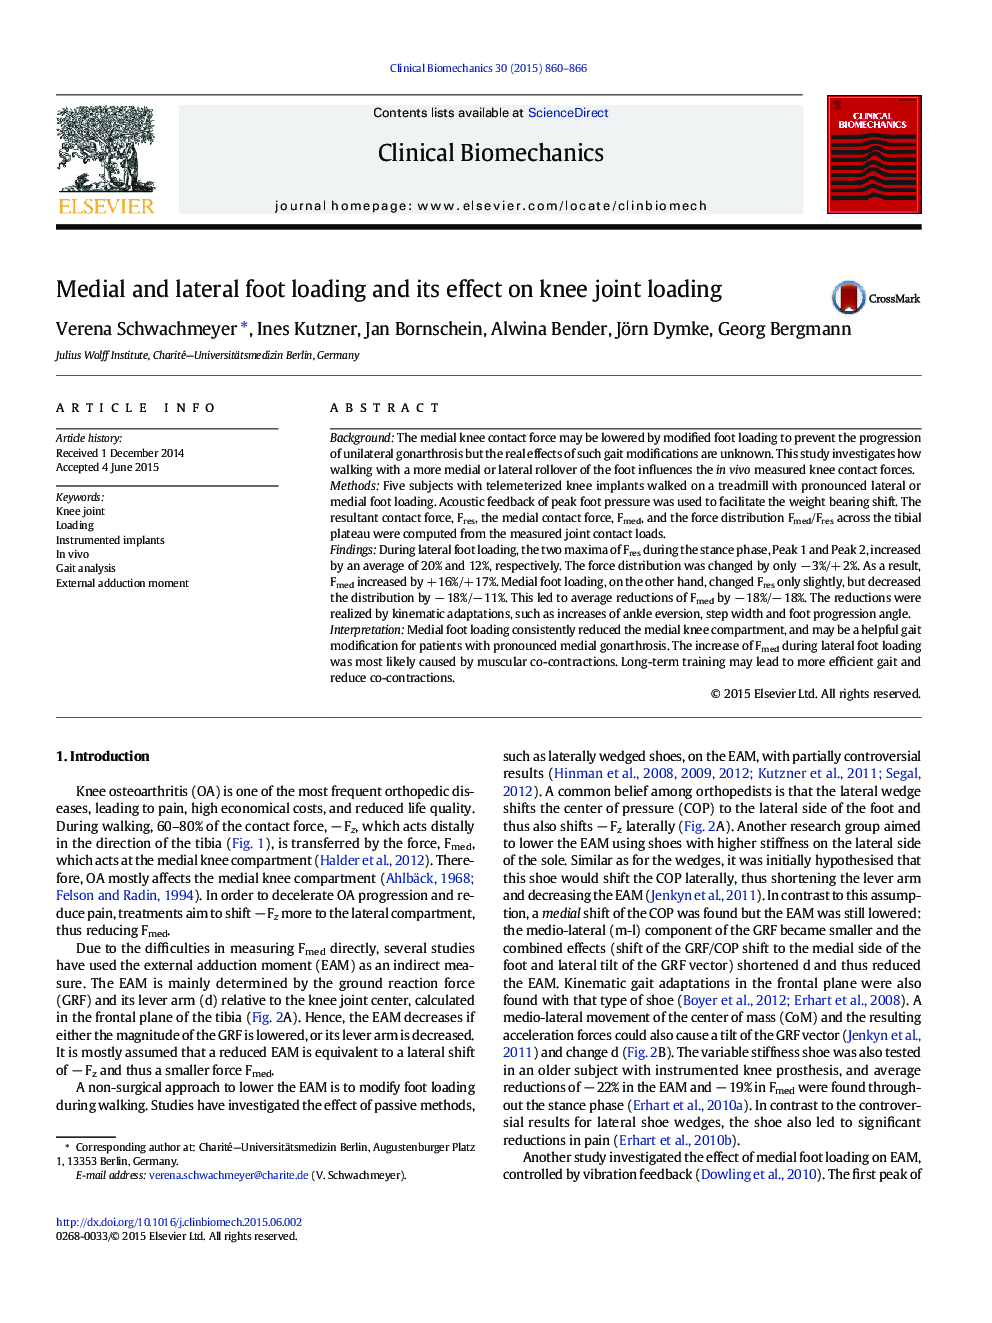 Medial and lateral foot loading and its effect on knee joint loading